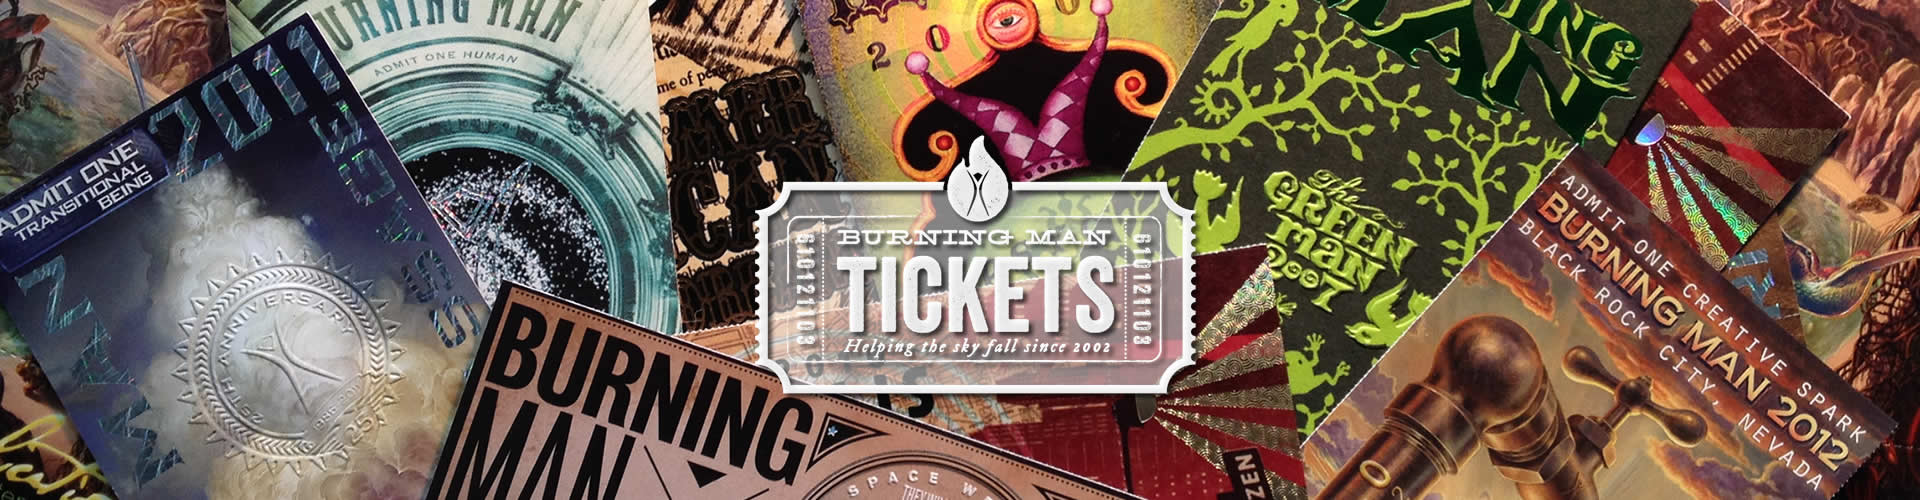 Burning Man Tickets Official source for information about Black Rock